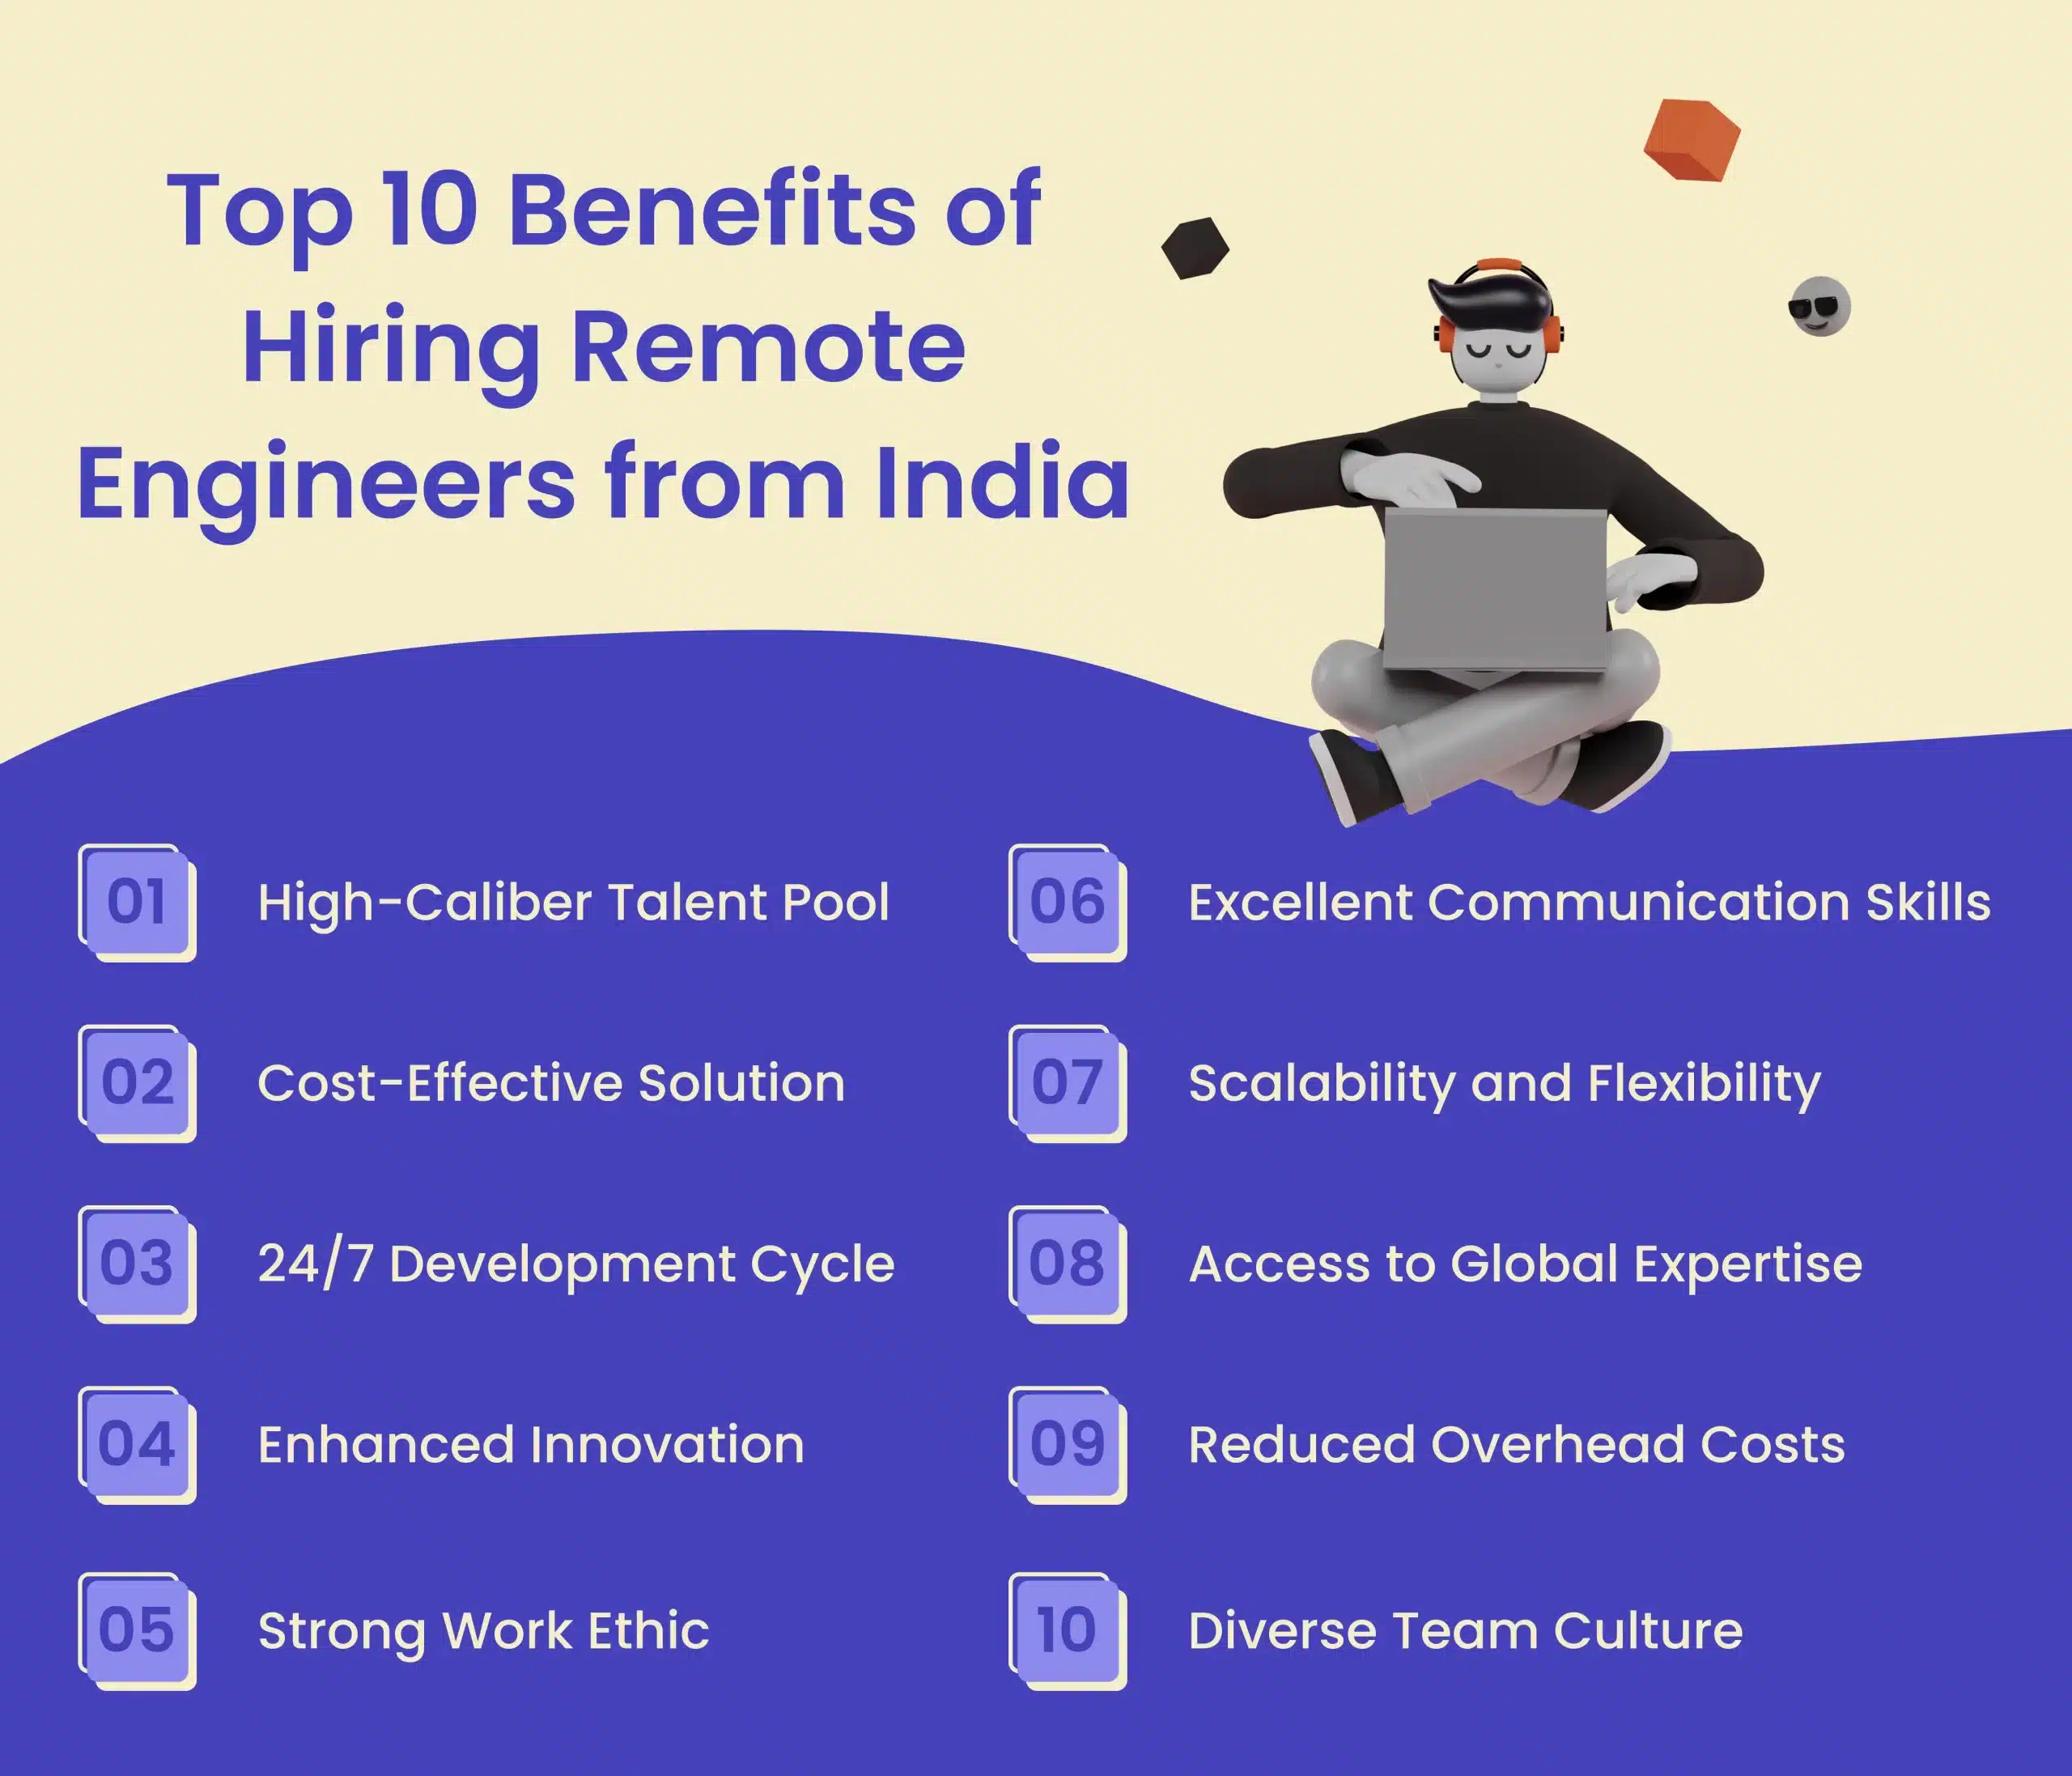 Benefits of Hiring Remote Engineers from India